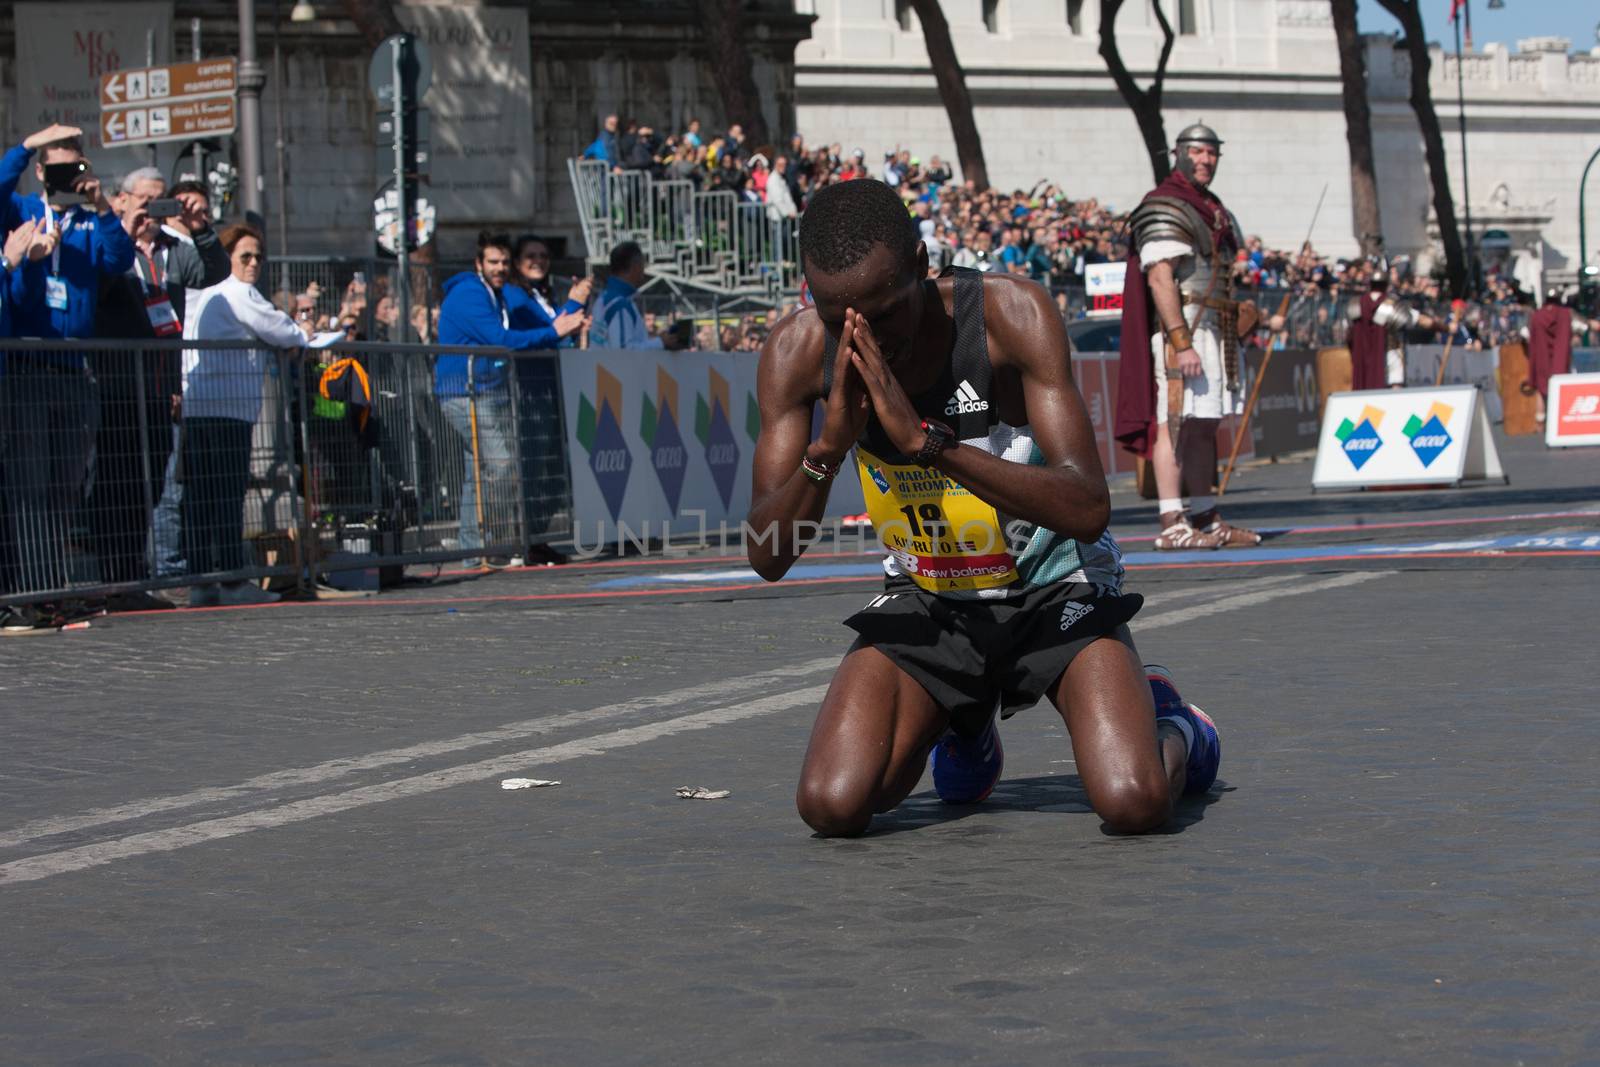 ITALY, Rome: Kenyan runner Amos Kipruto is pictured down on his knees as he won the finish line of Rome City Marathon  in Rome on April 10, 2016. He won the first position in 2h08'16”.